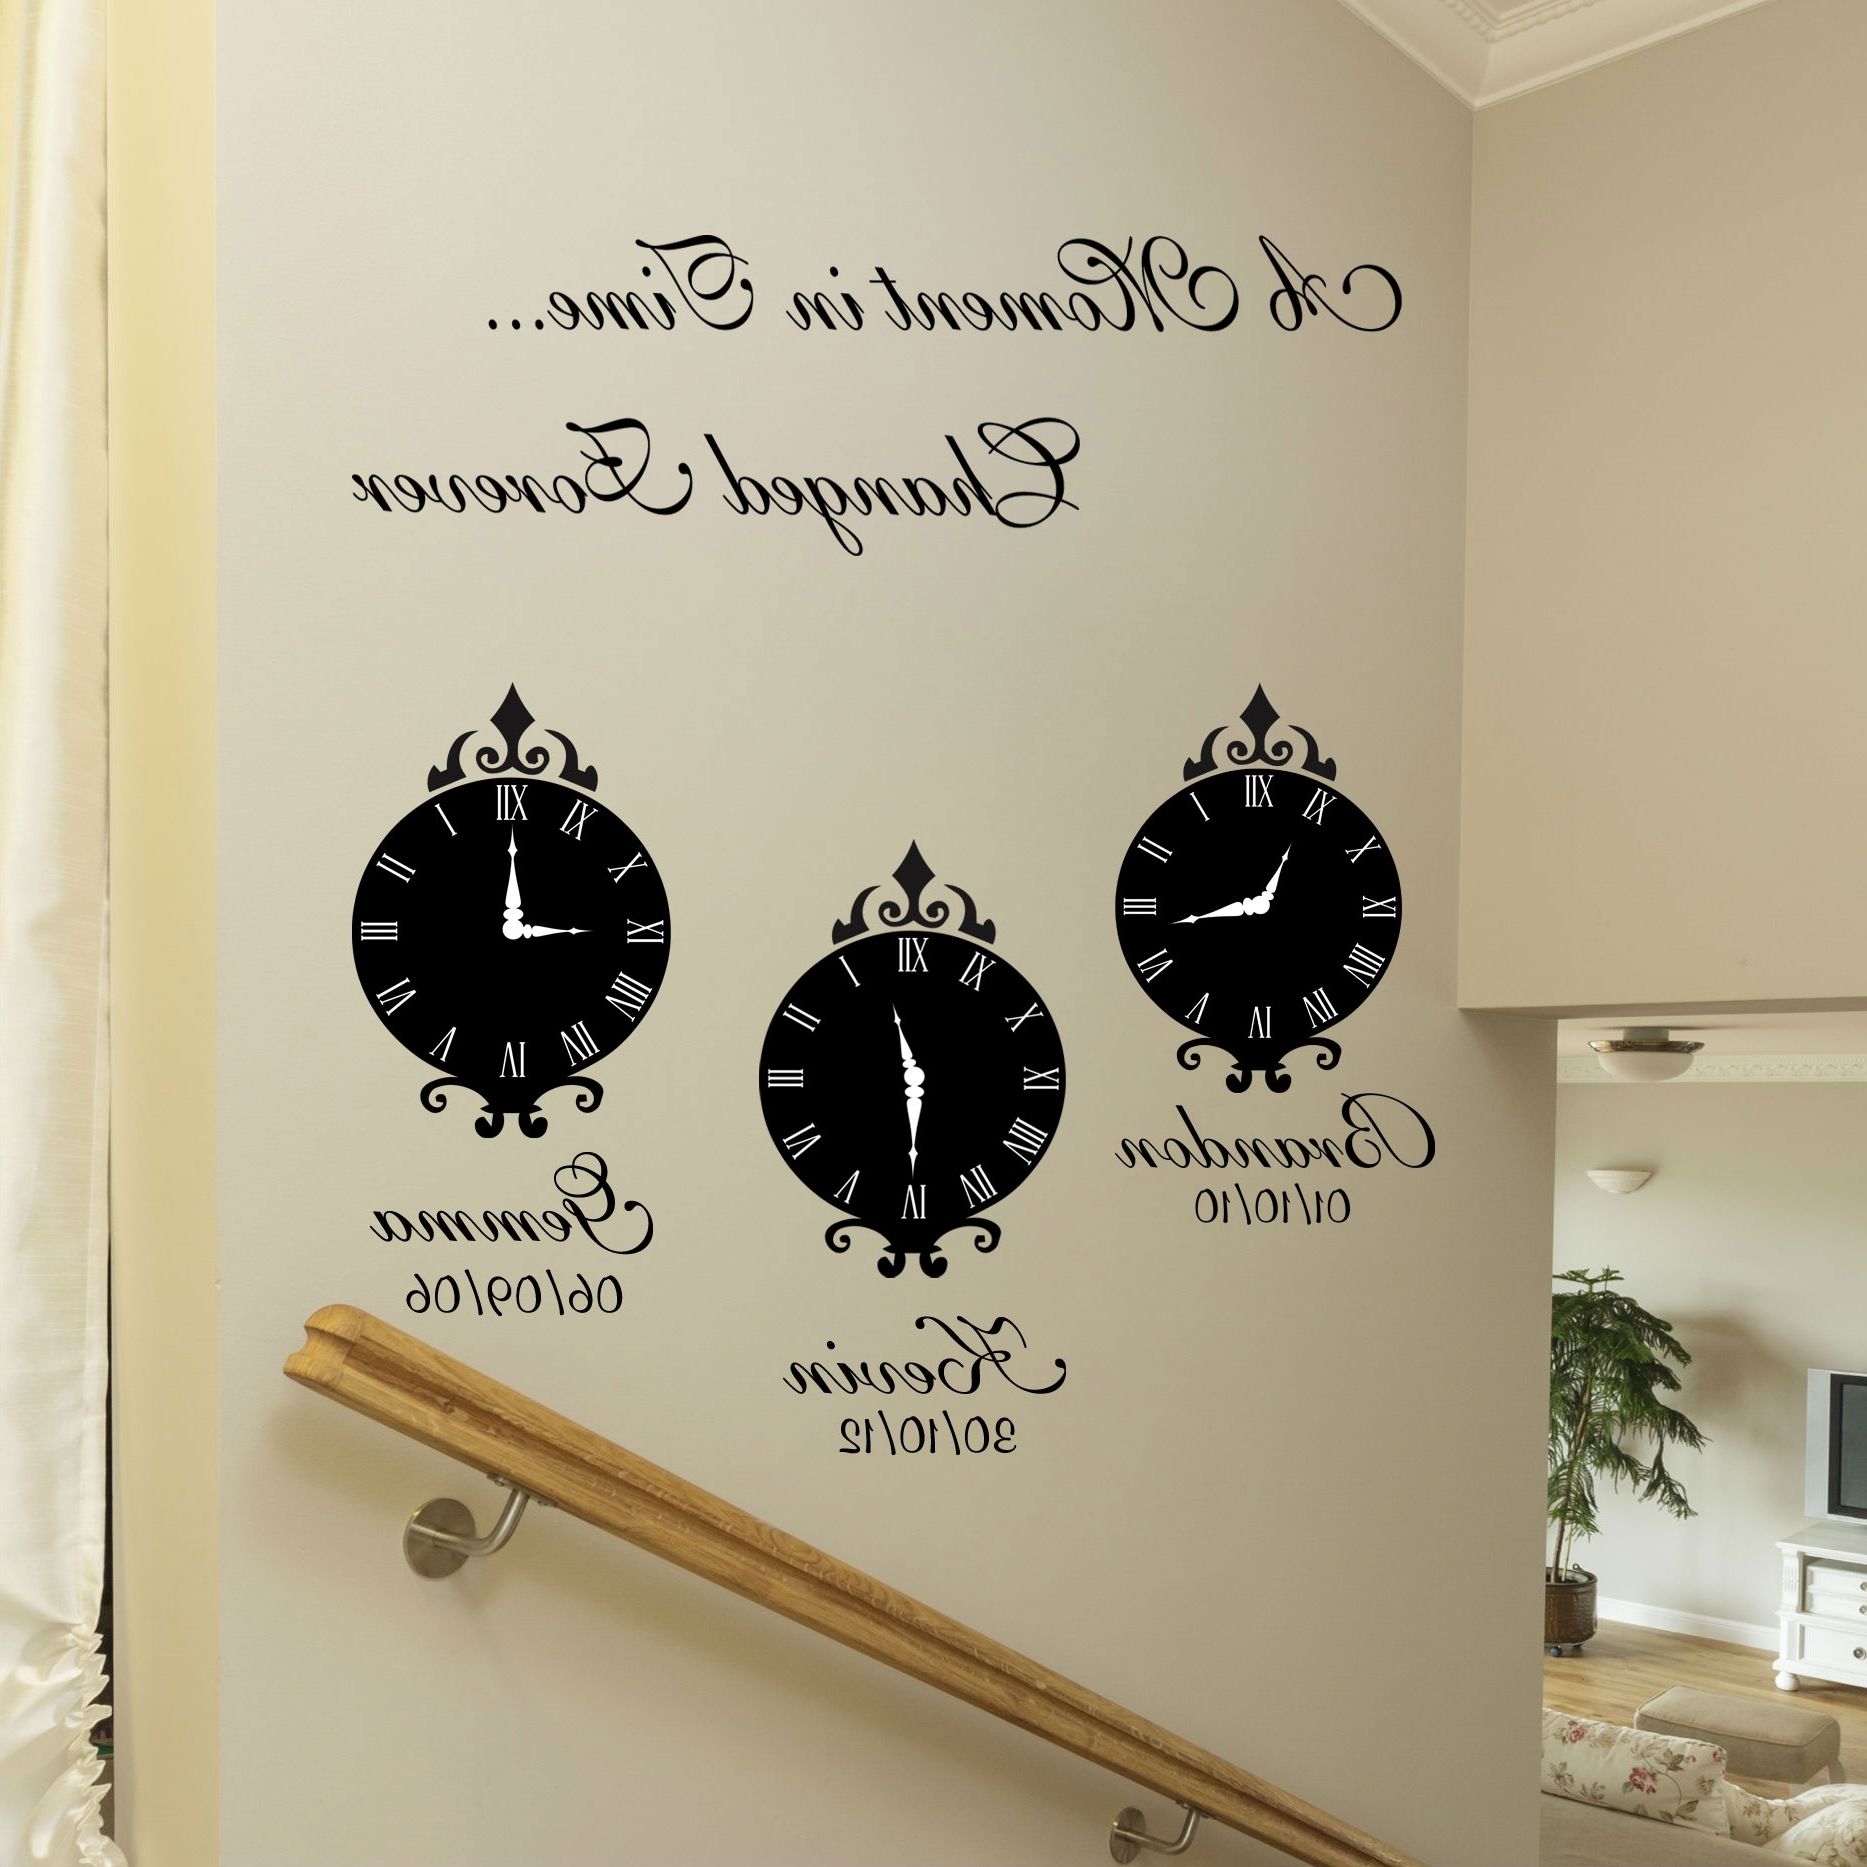 Recent A Moment In Time Wall Art Stickers Intended For Wall Sticker Art (View 9 of 15)